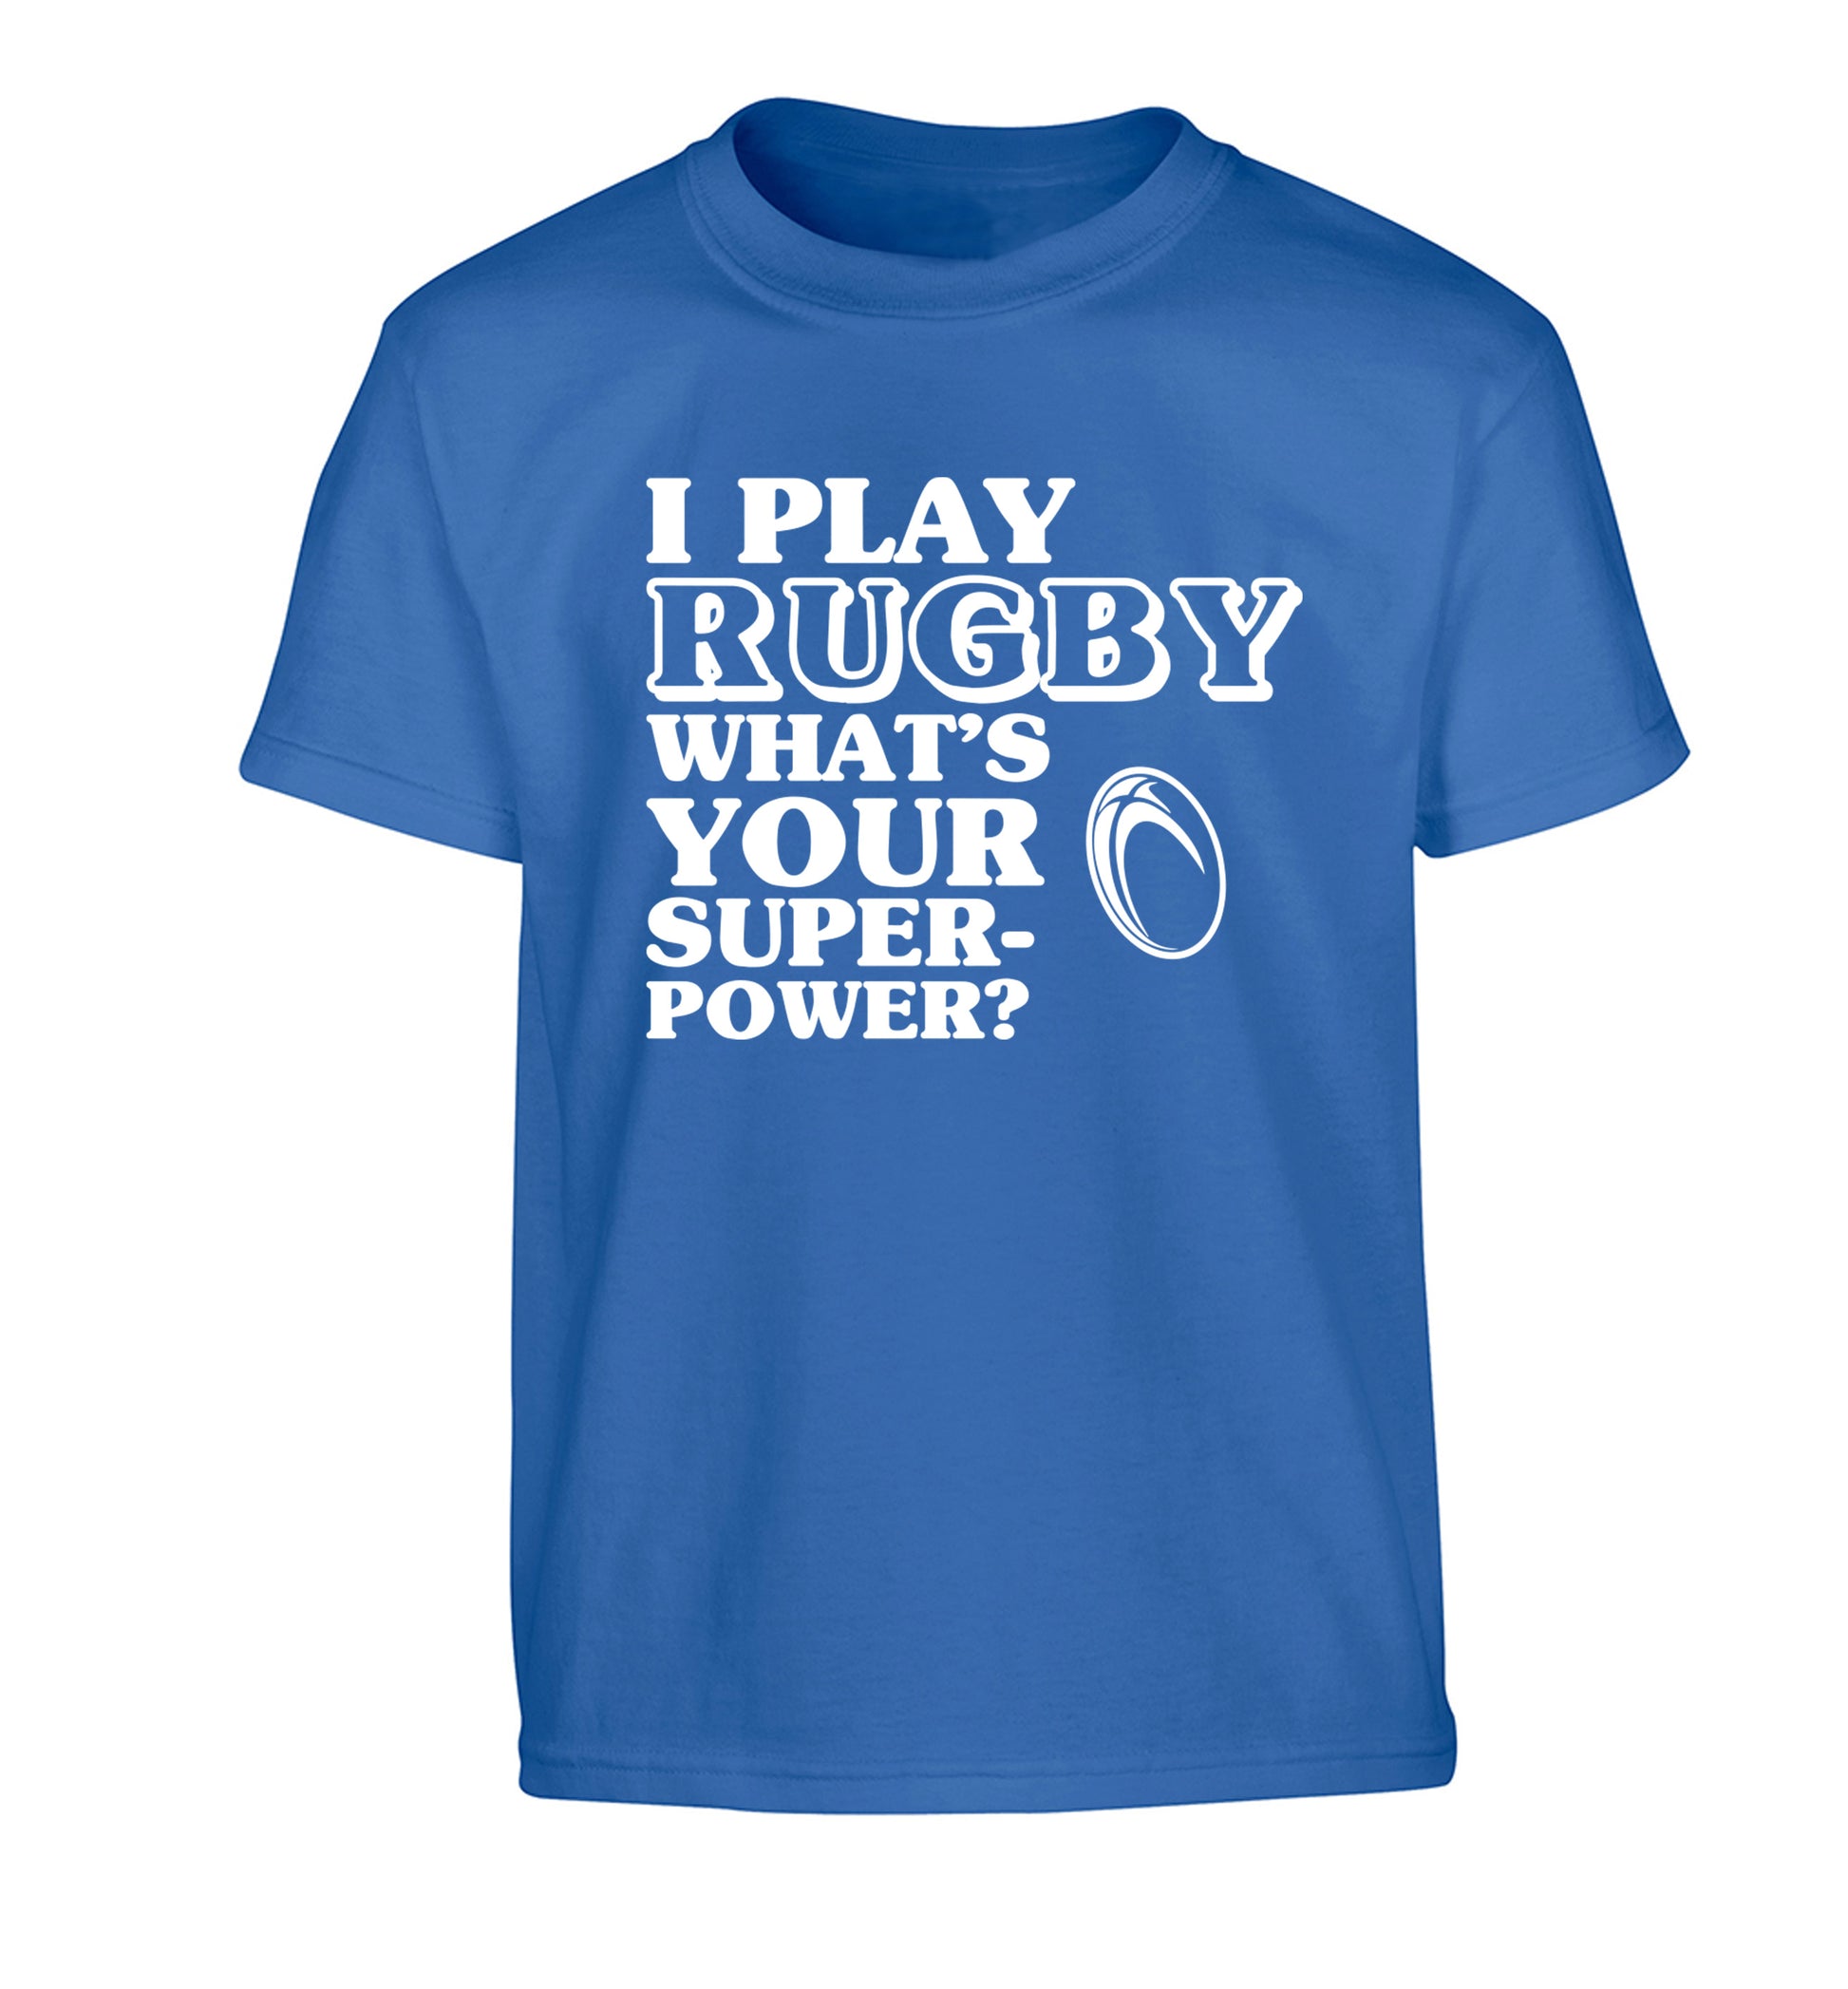 I play rugby what's your superpower? Children's blue Tshirt 12-13 Years